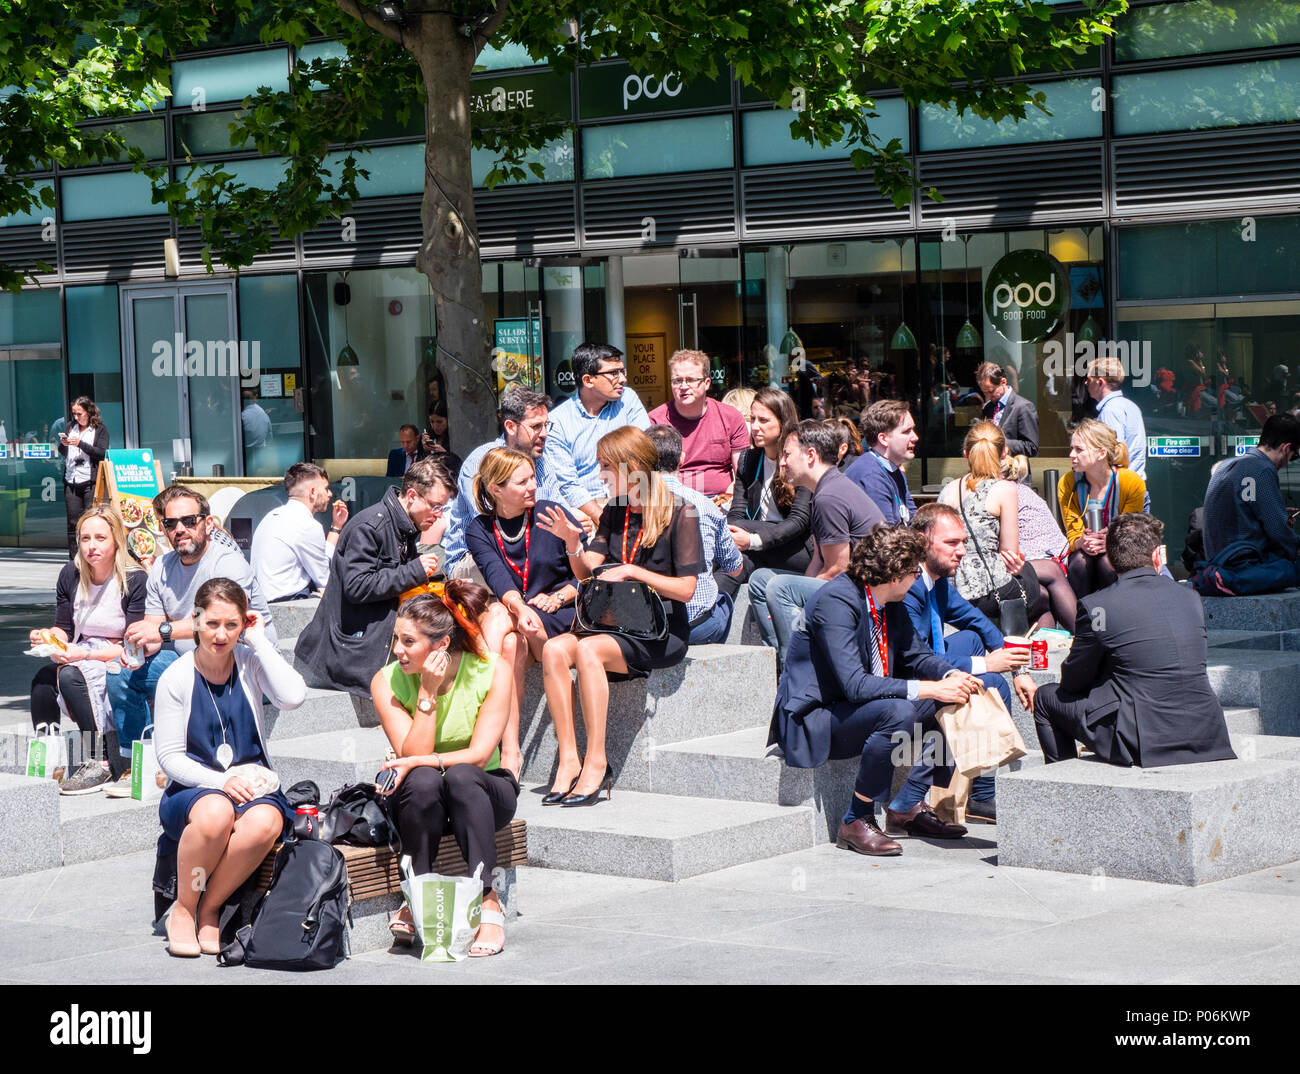 Summer Day People on Lunch, Regents Place, New Development, Camden, London, England, UK, GB. Stock Photo